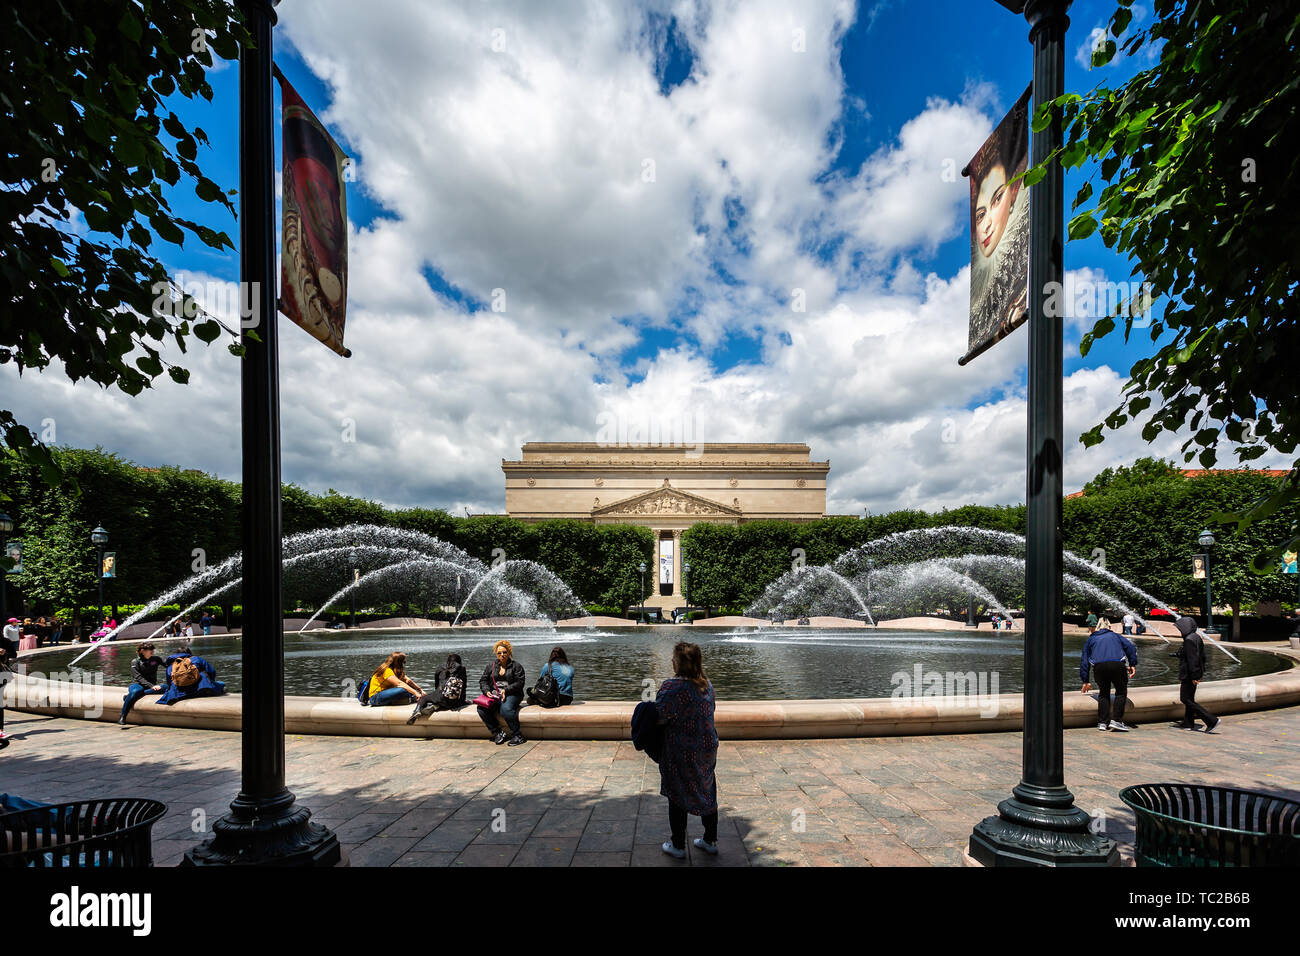 Circular pond and fountains in the center of The National Gallery of Art Sculpture Garden in Washington DC, USA on 14 May 2019 Stock Photo